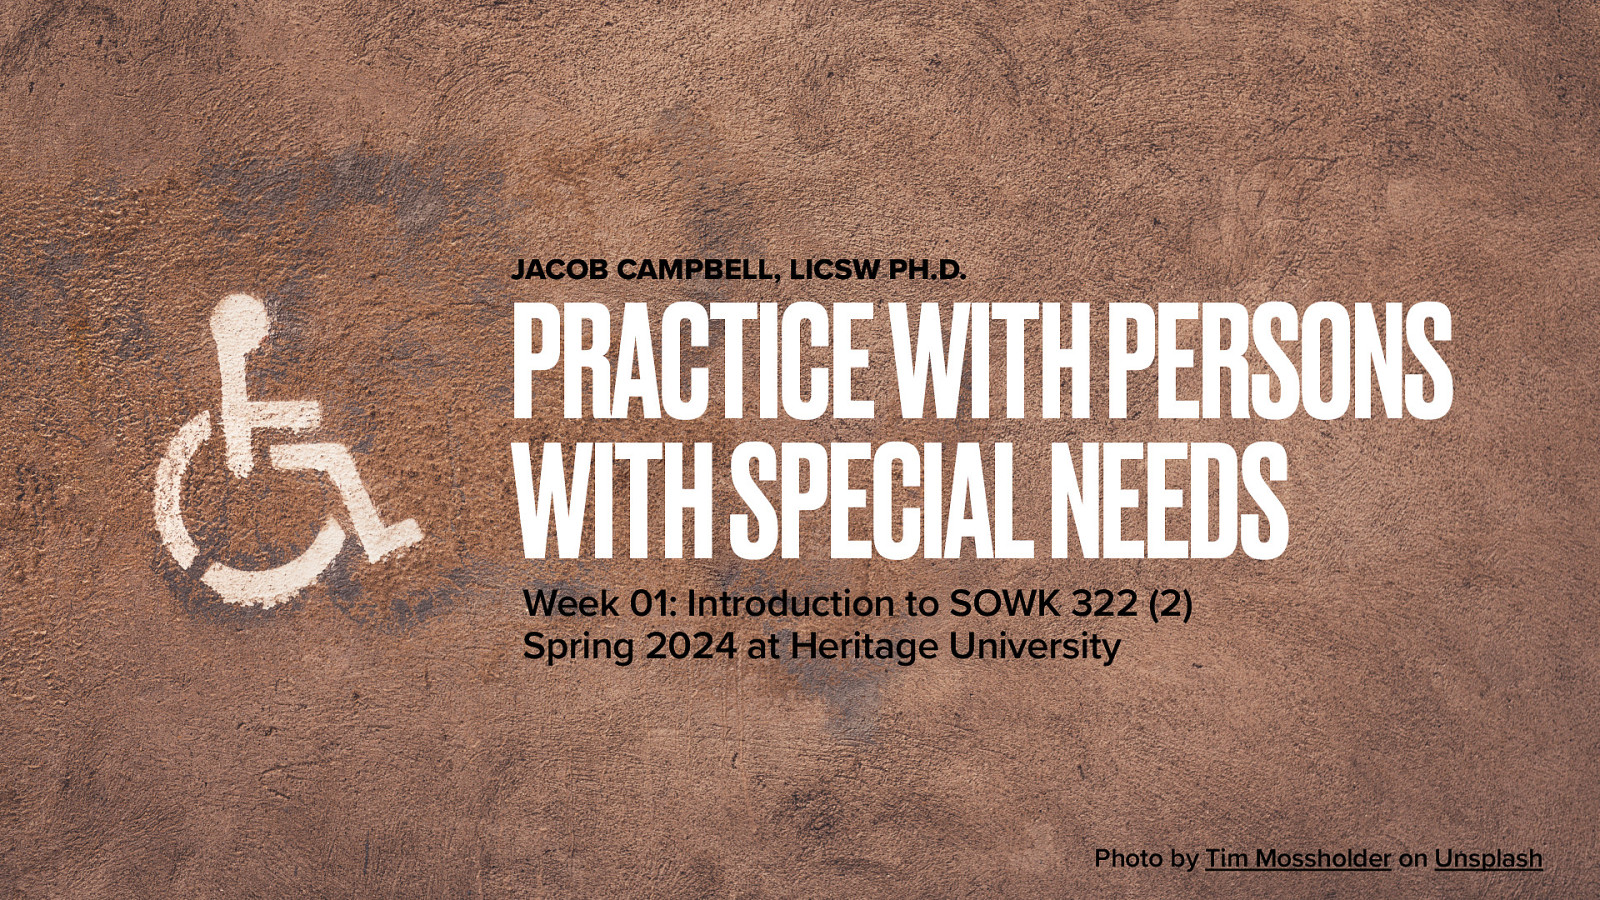 Spring 2024 SOWK 322 Week 01 - Course Introduction and Syllabus Review